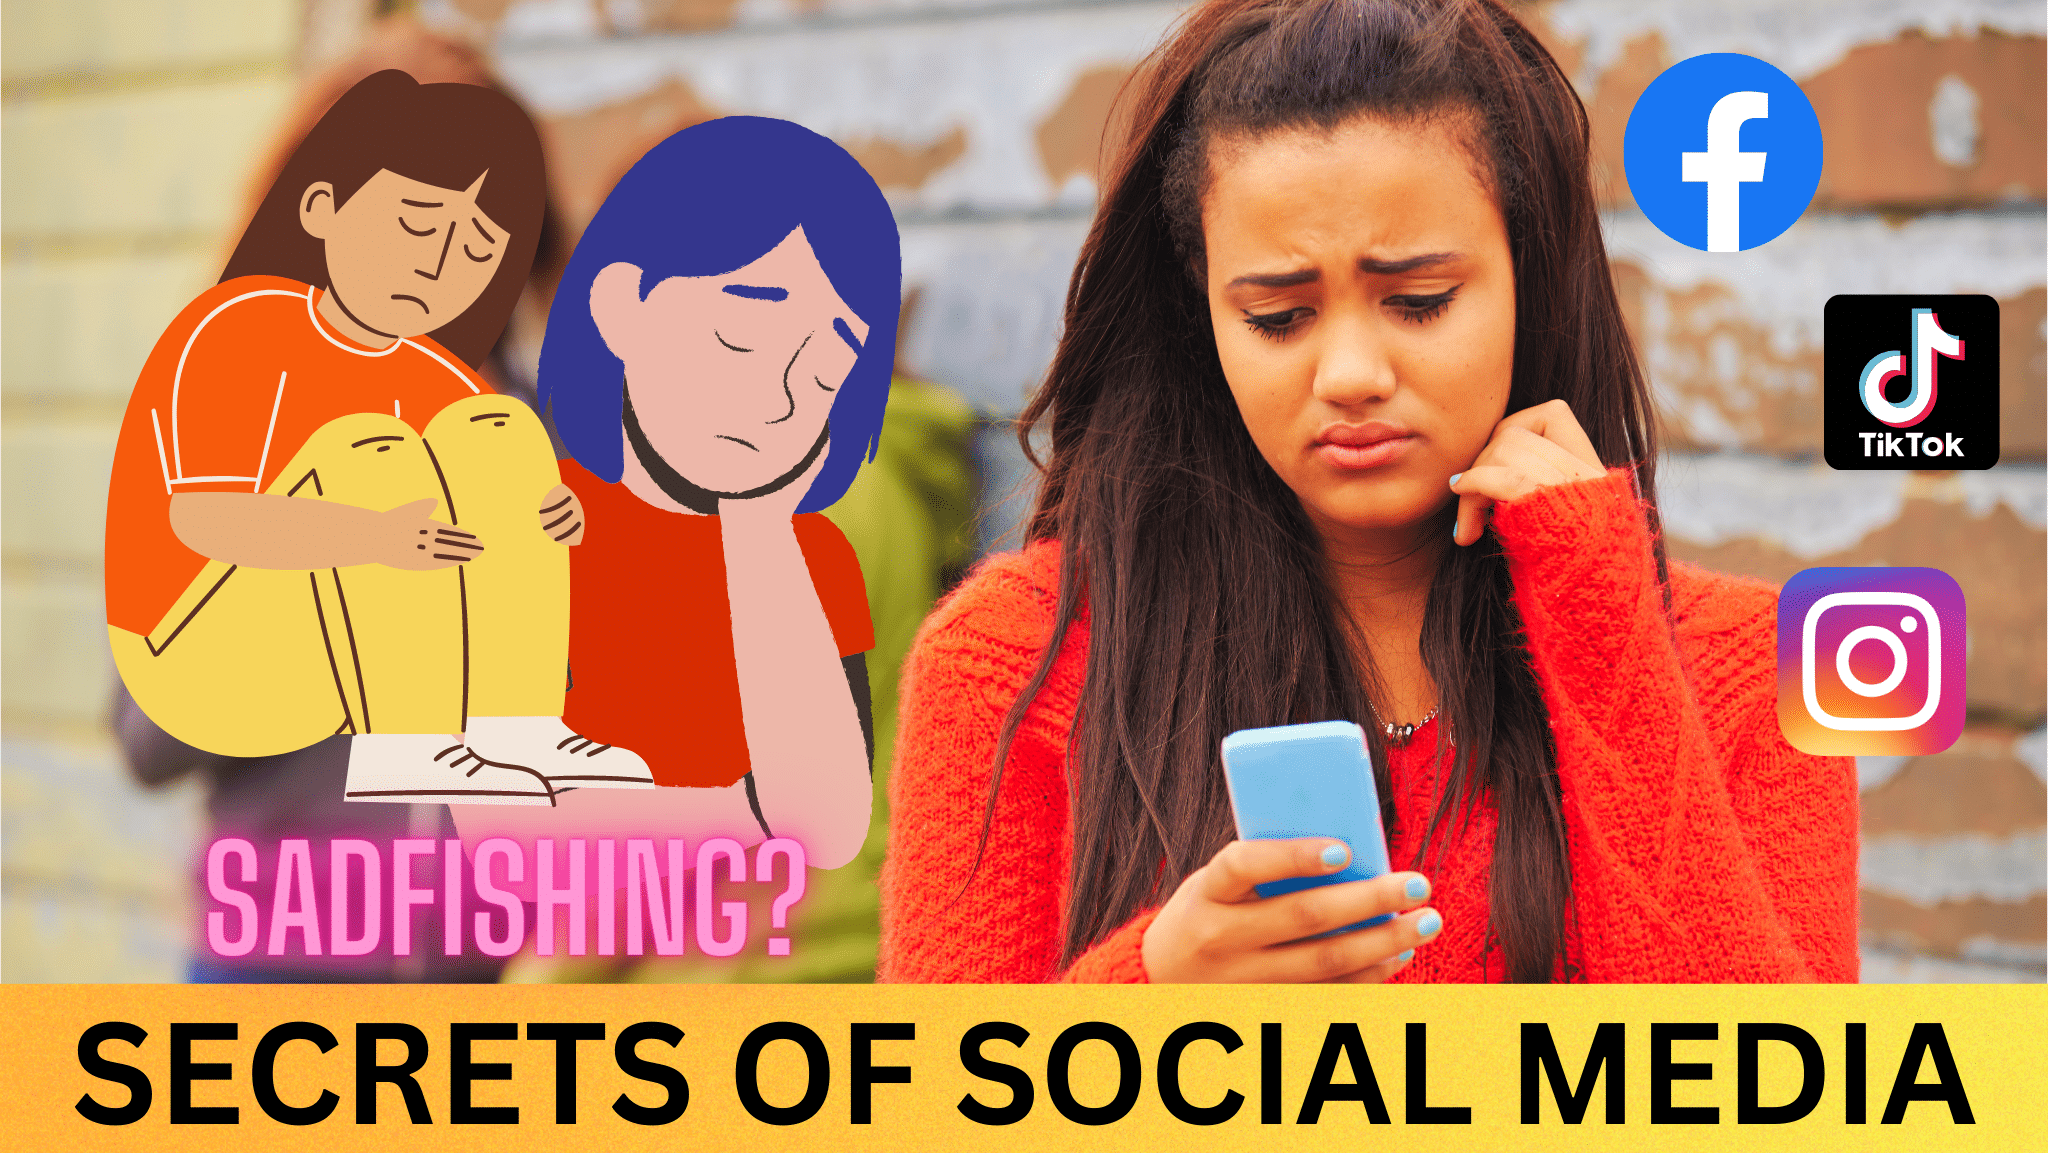 teens using social media to seek sympathy and attention